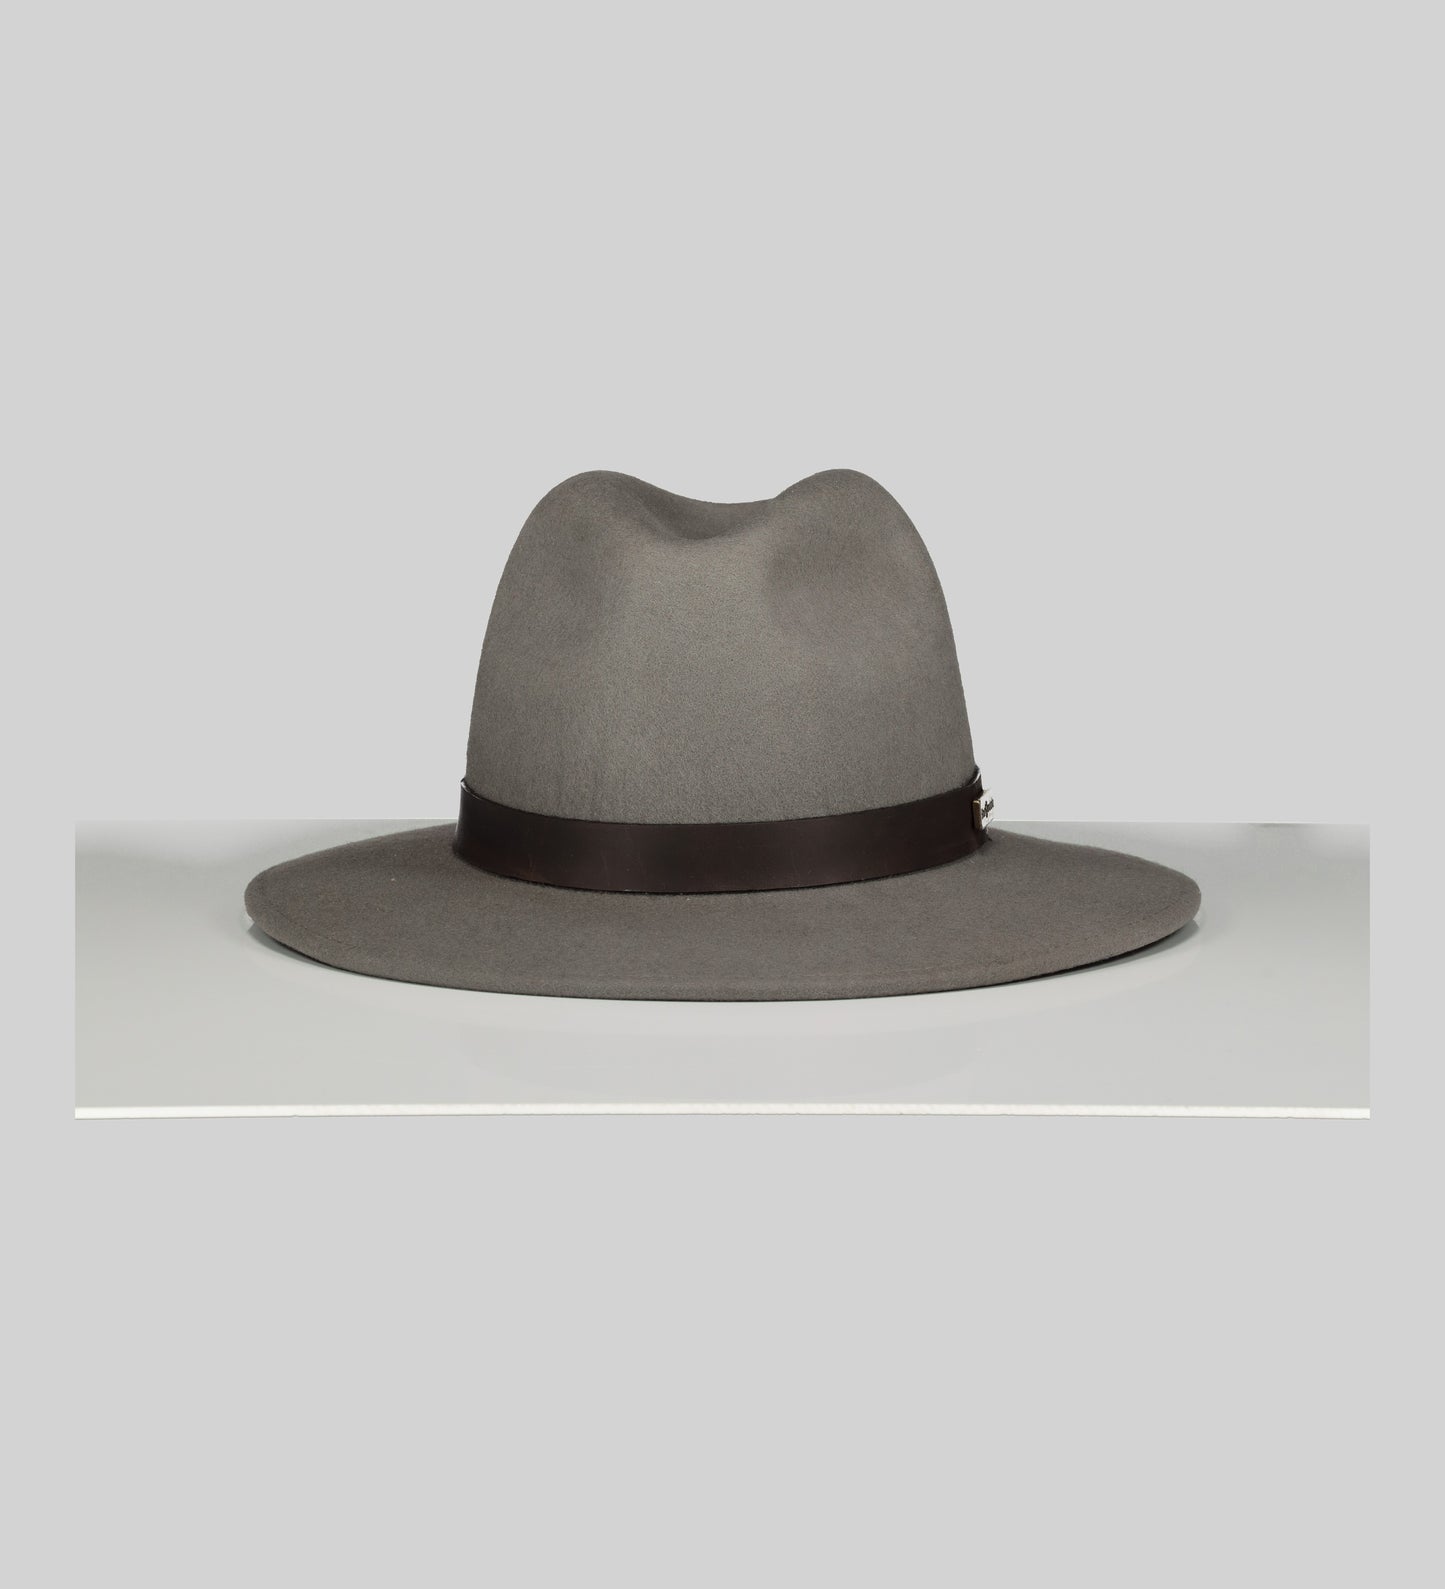 Two Tone Fedora Hat with Charcoal Trim